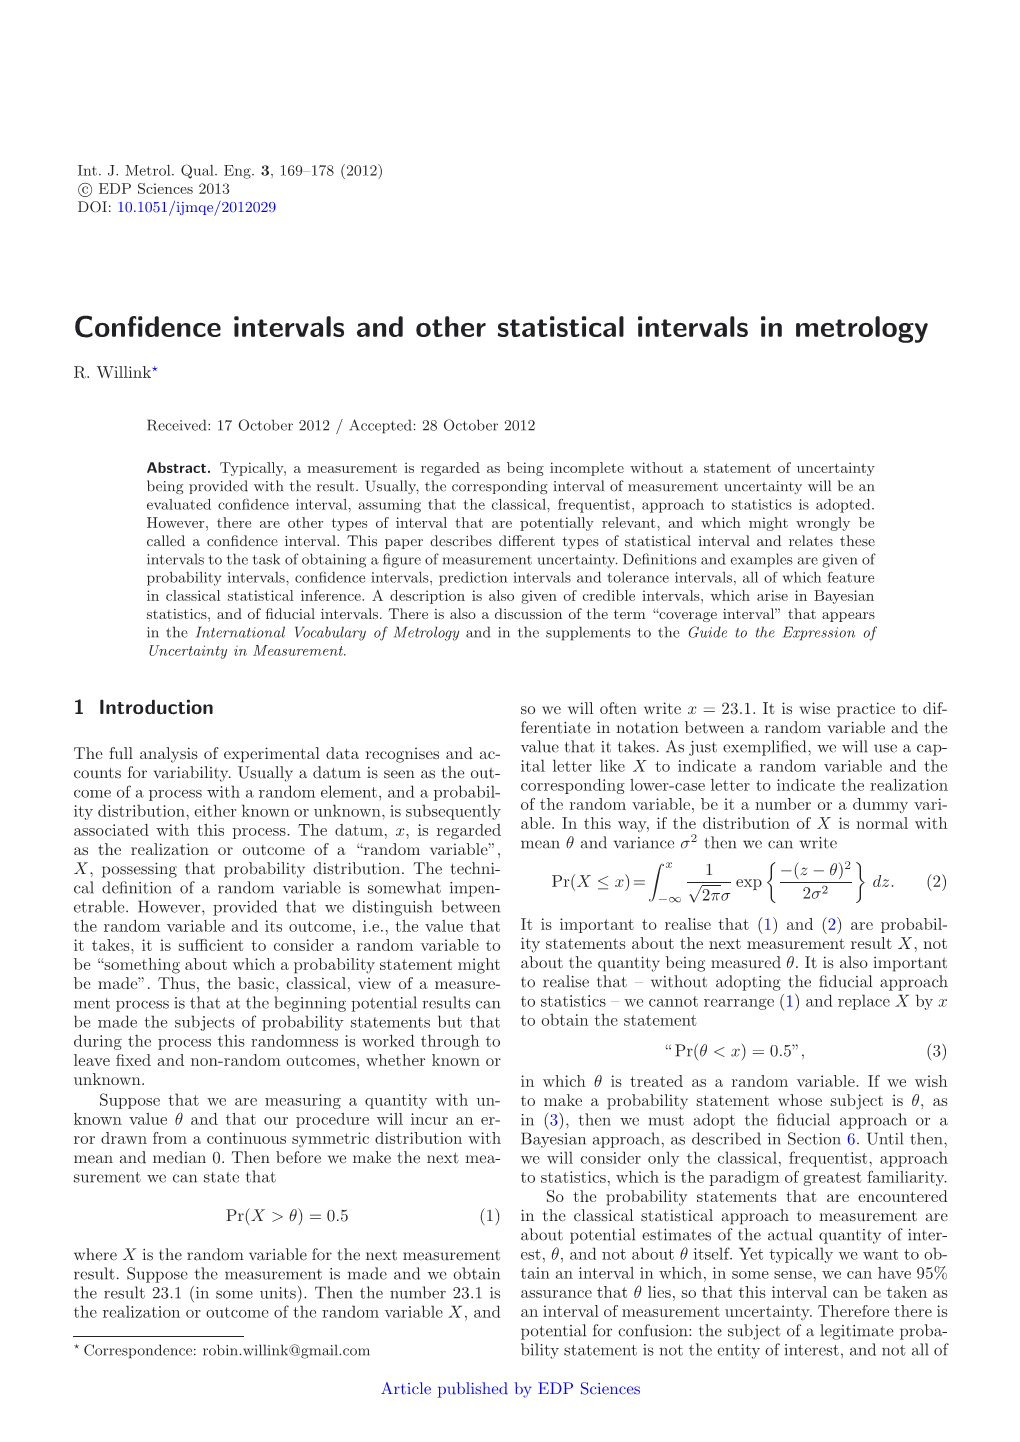 Confidence Intervals and Other Statistical Intervals in Metrology